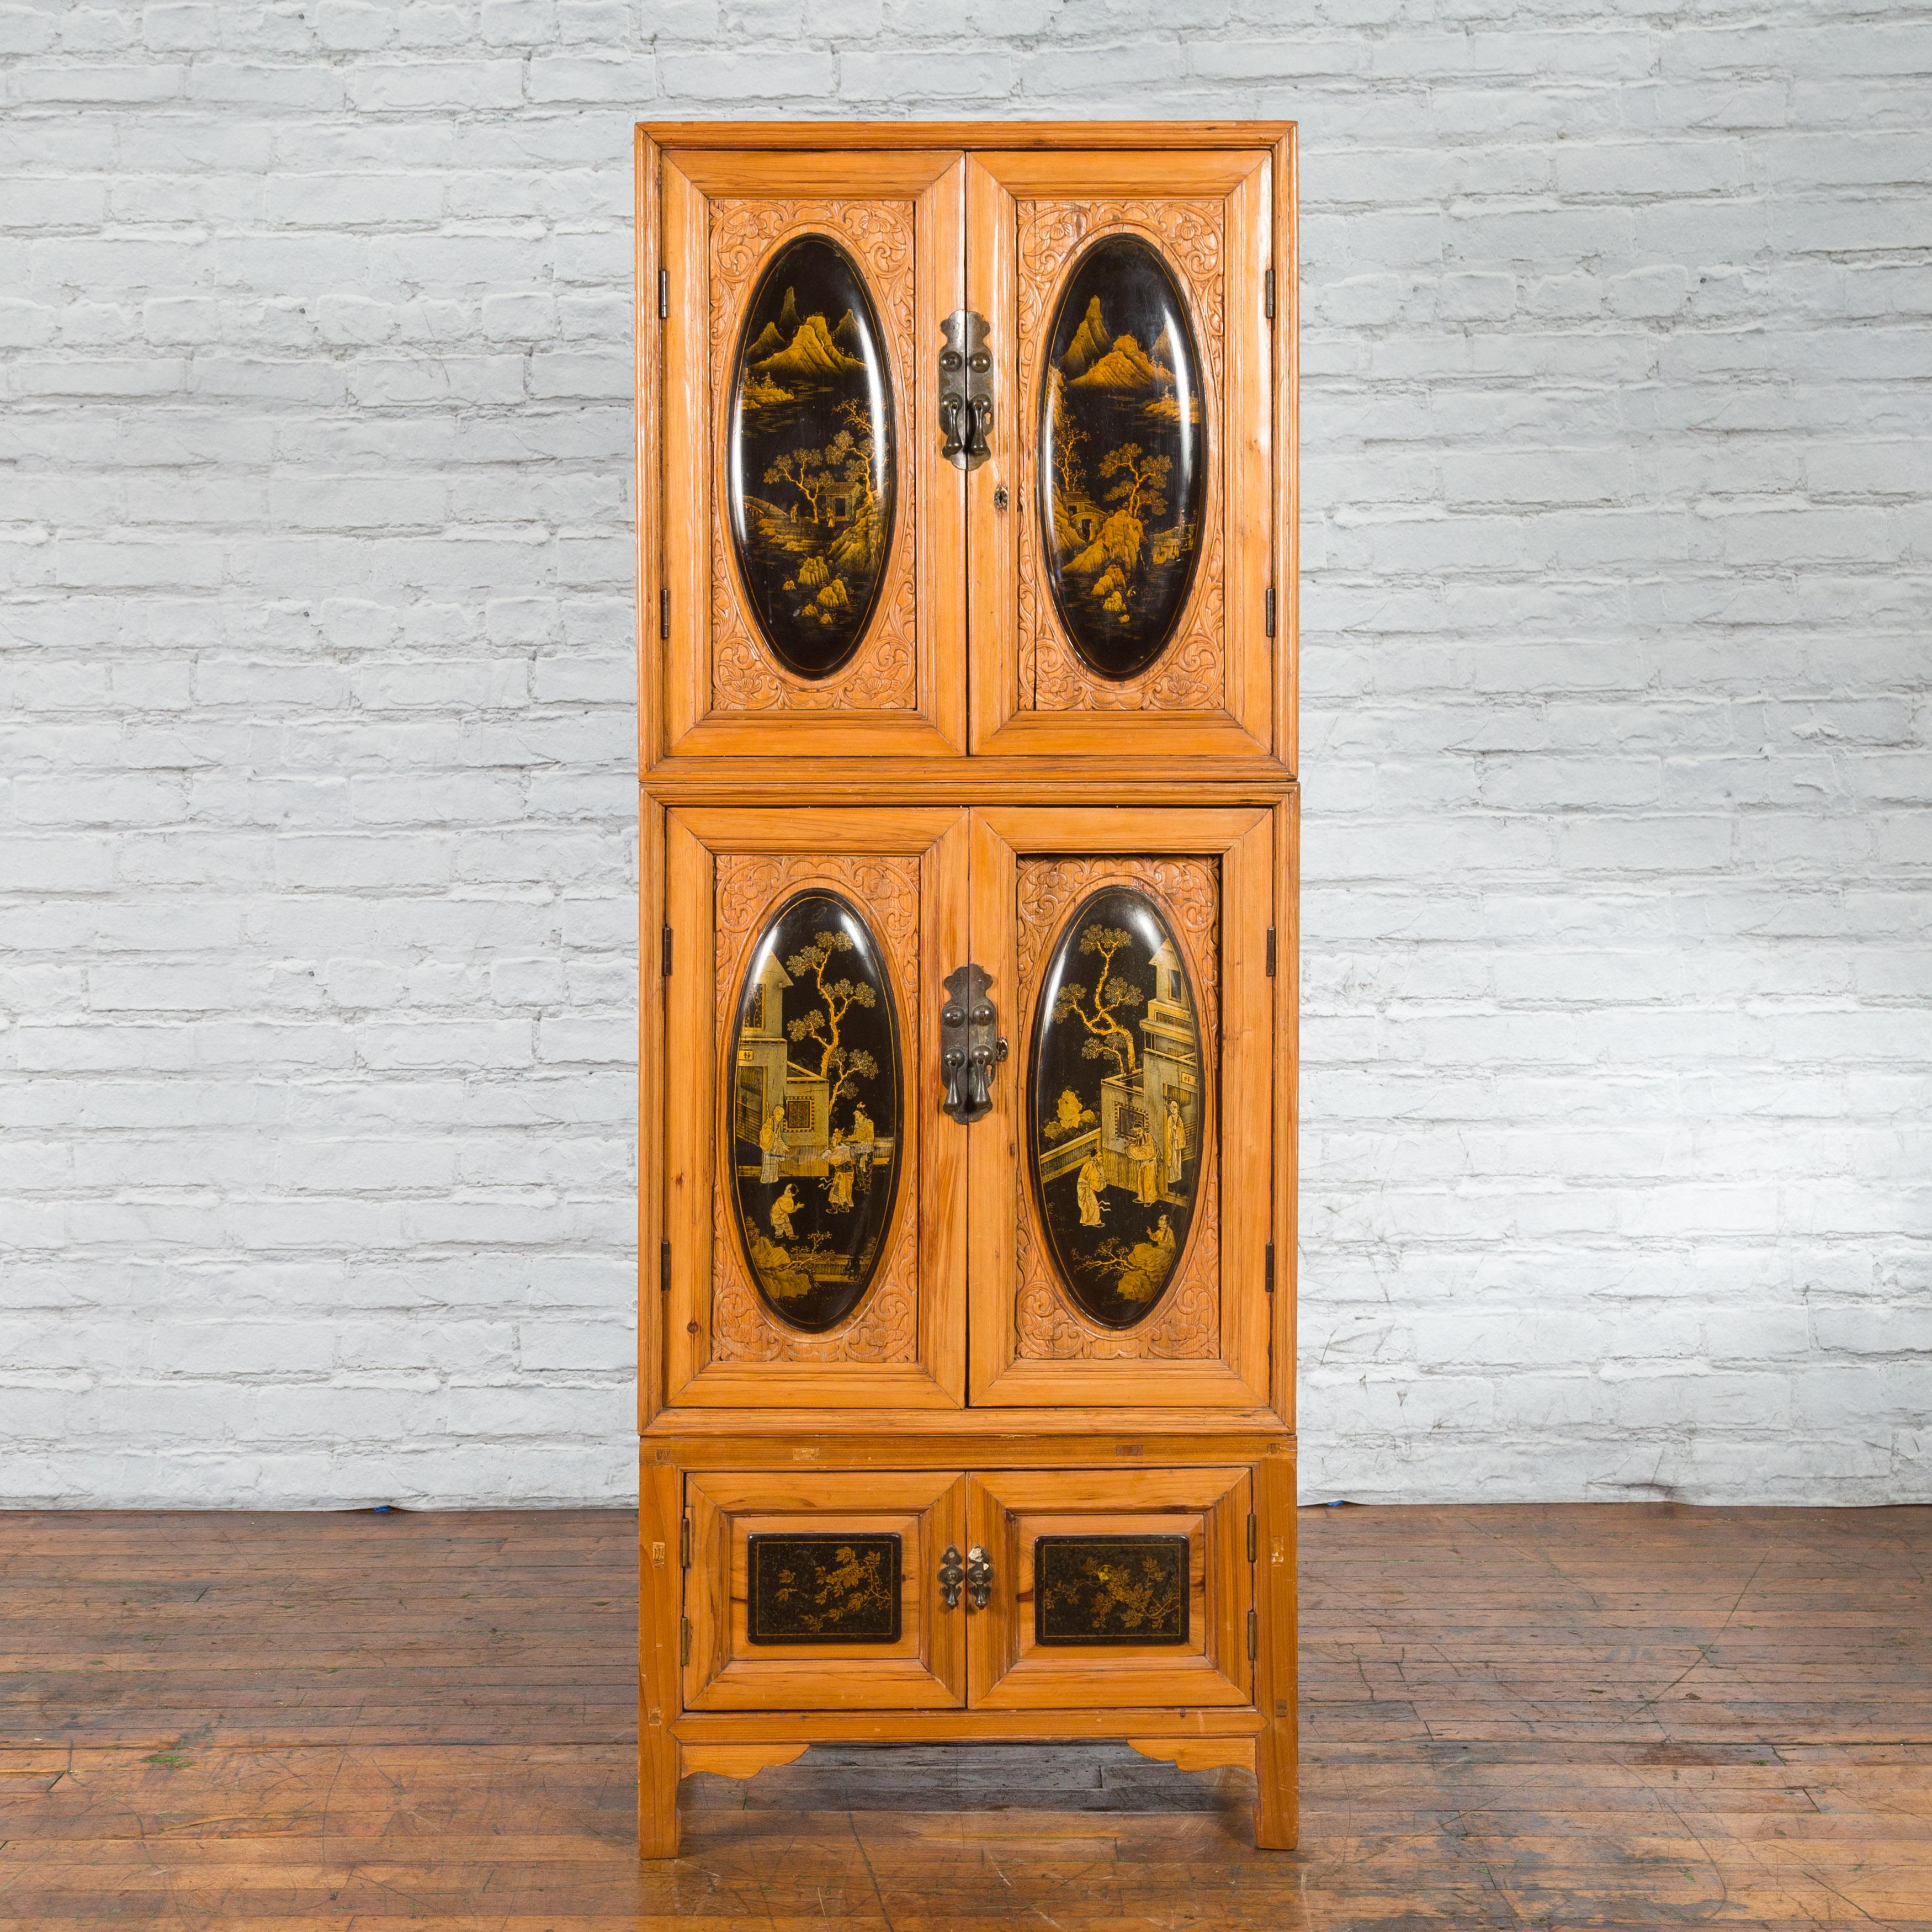 A tall Chinese Qing Dynasty style wooden cabinet from the late 20th century, with chinoiserie panels. Created in China, this cabinet is made of natural wood with beautifully carved and lacquered chinoiserie panels. Organized into three sections of